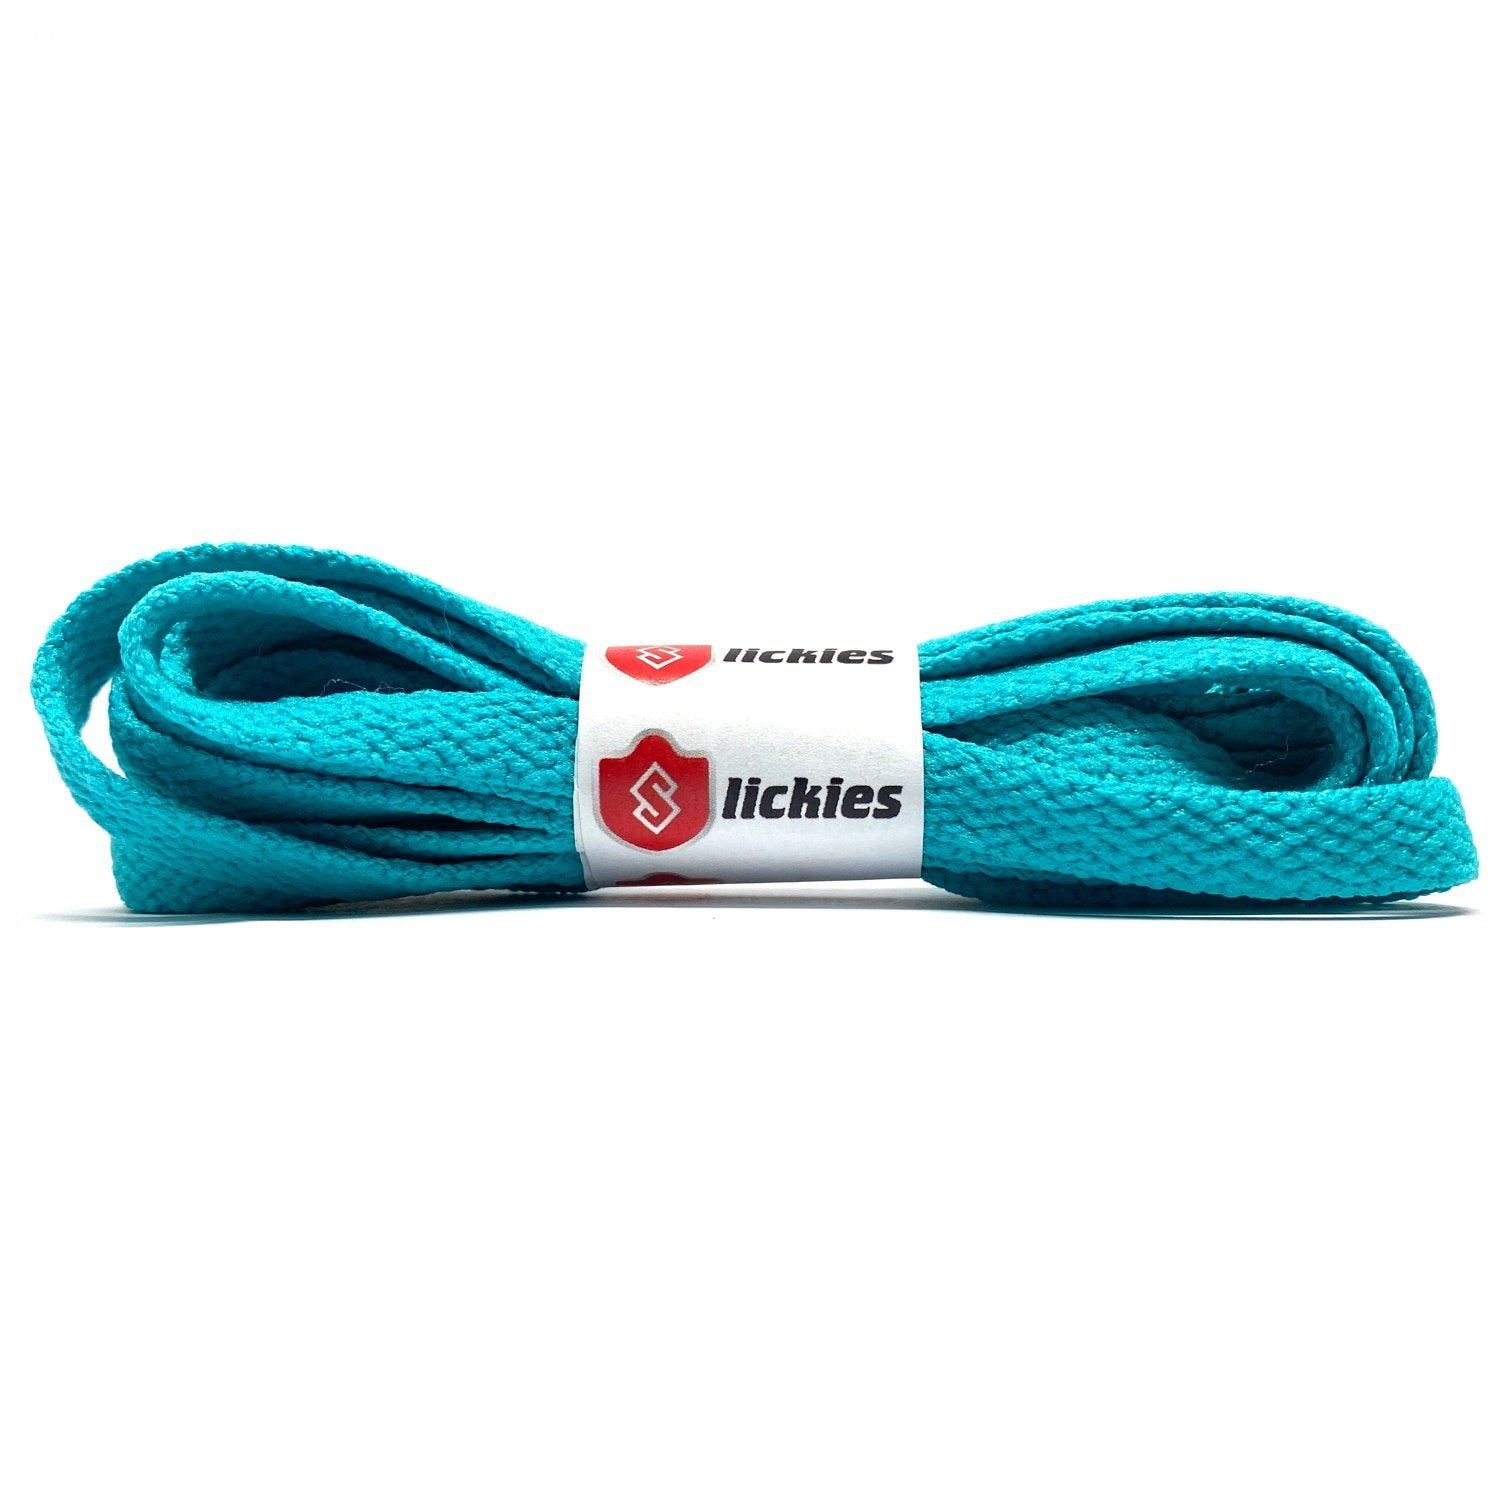 teal shoelaces